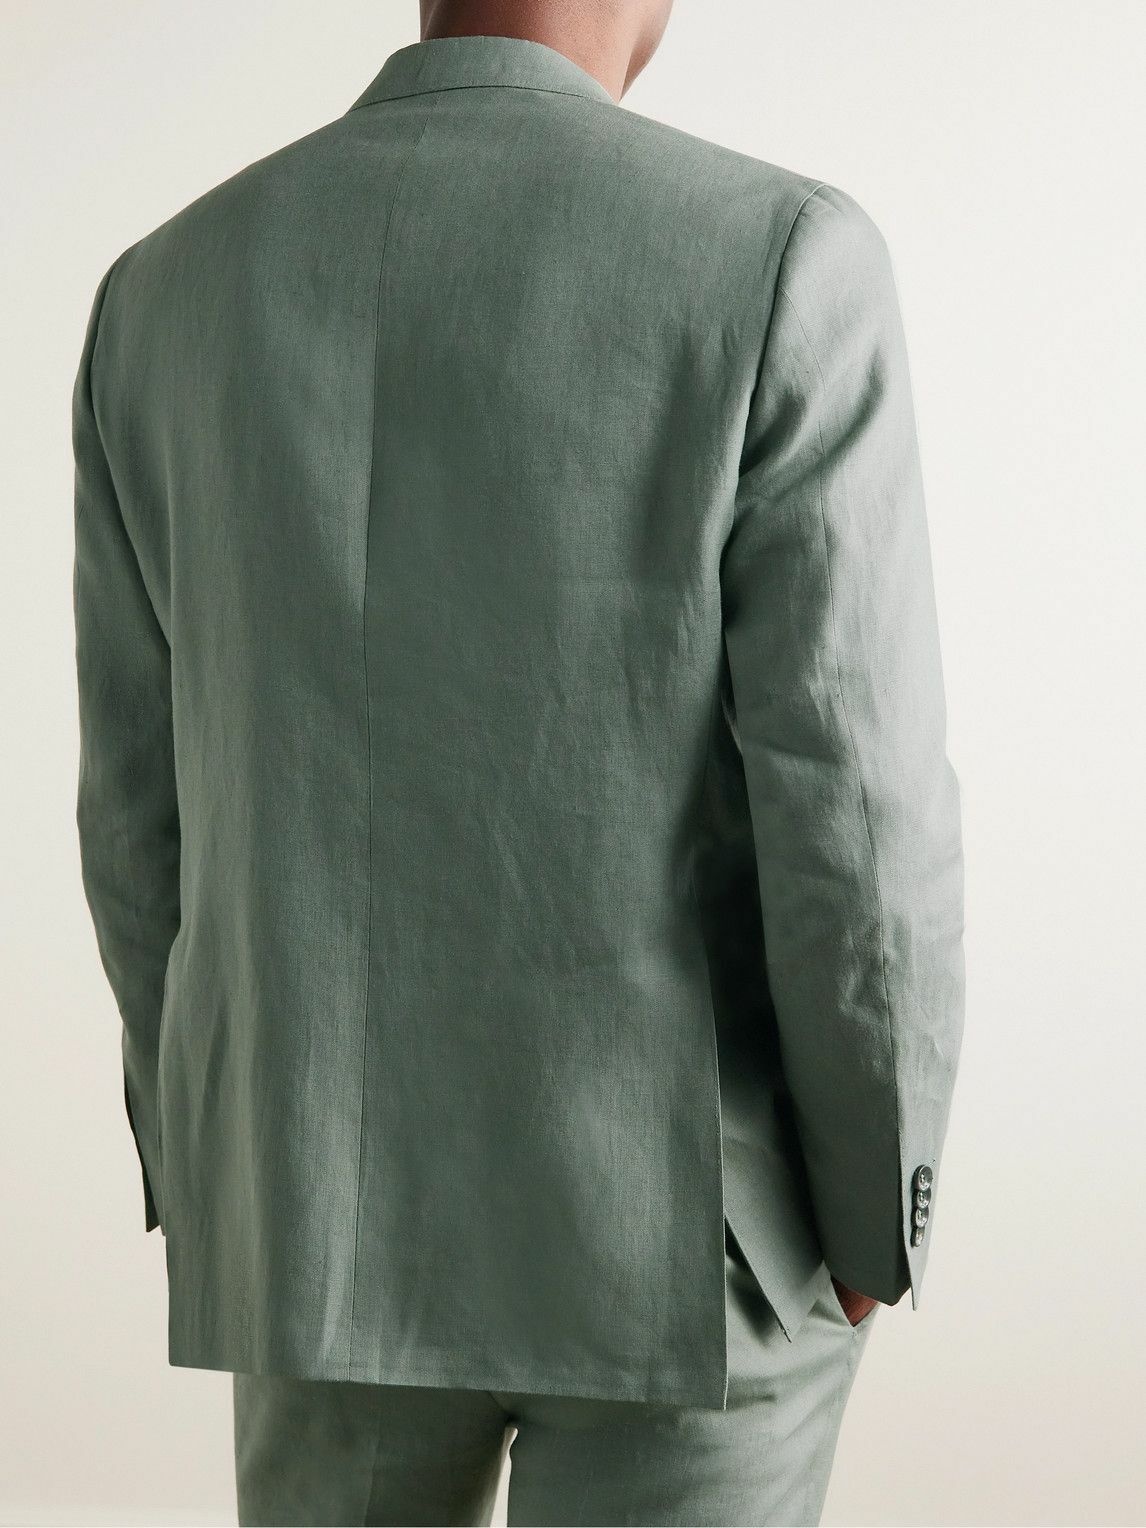 Canali - Linen Suit Jacket - Green Canali